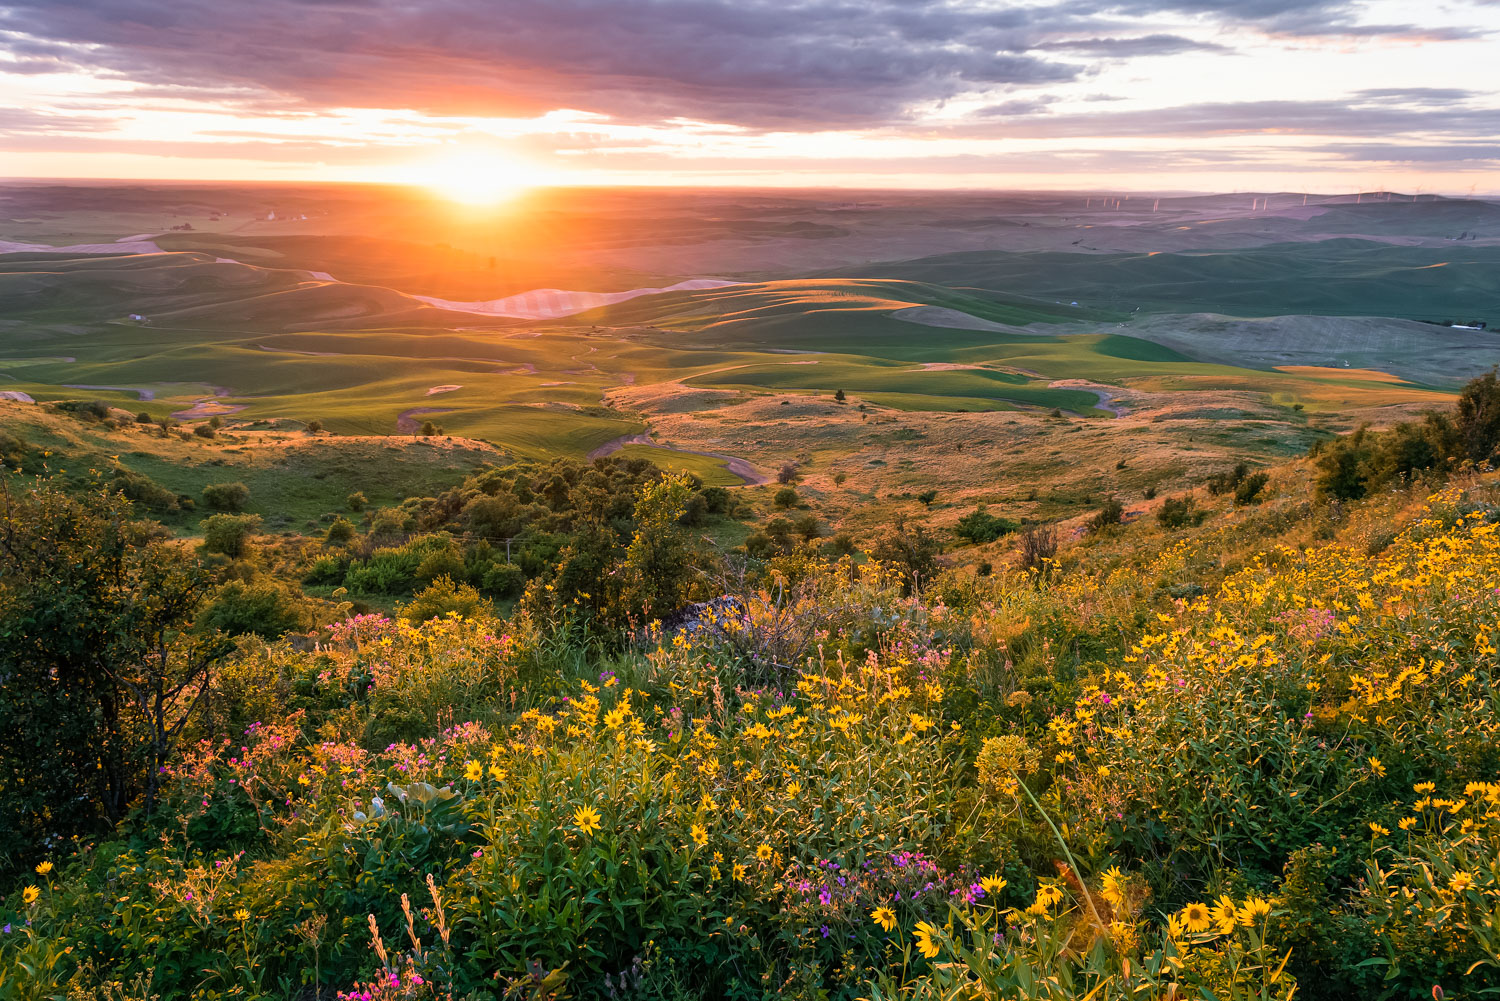 Steptoe Butte wildflowers and sunset.